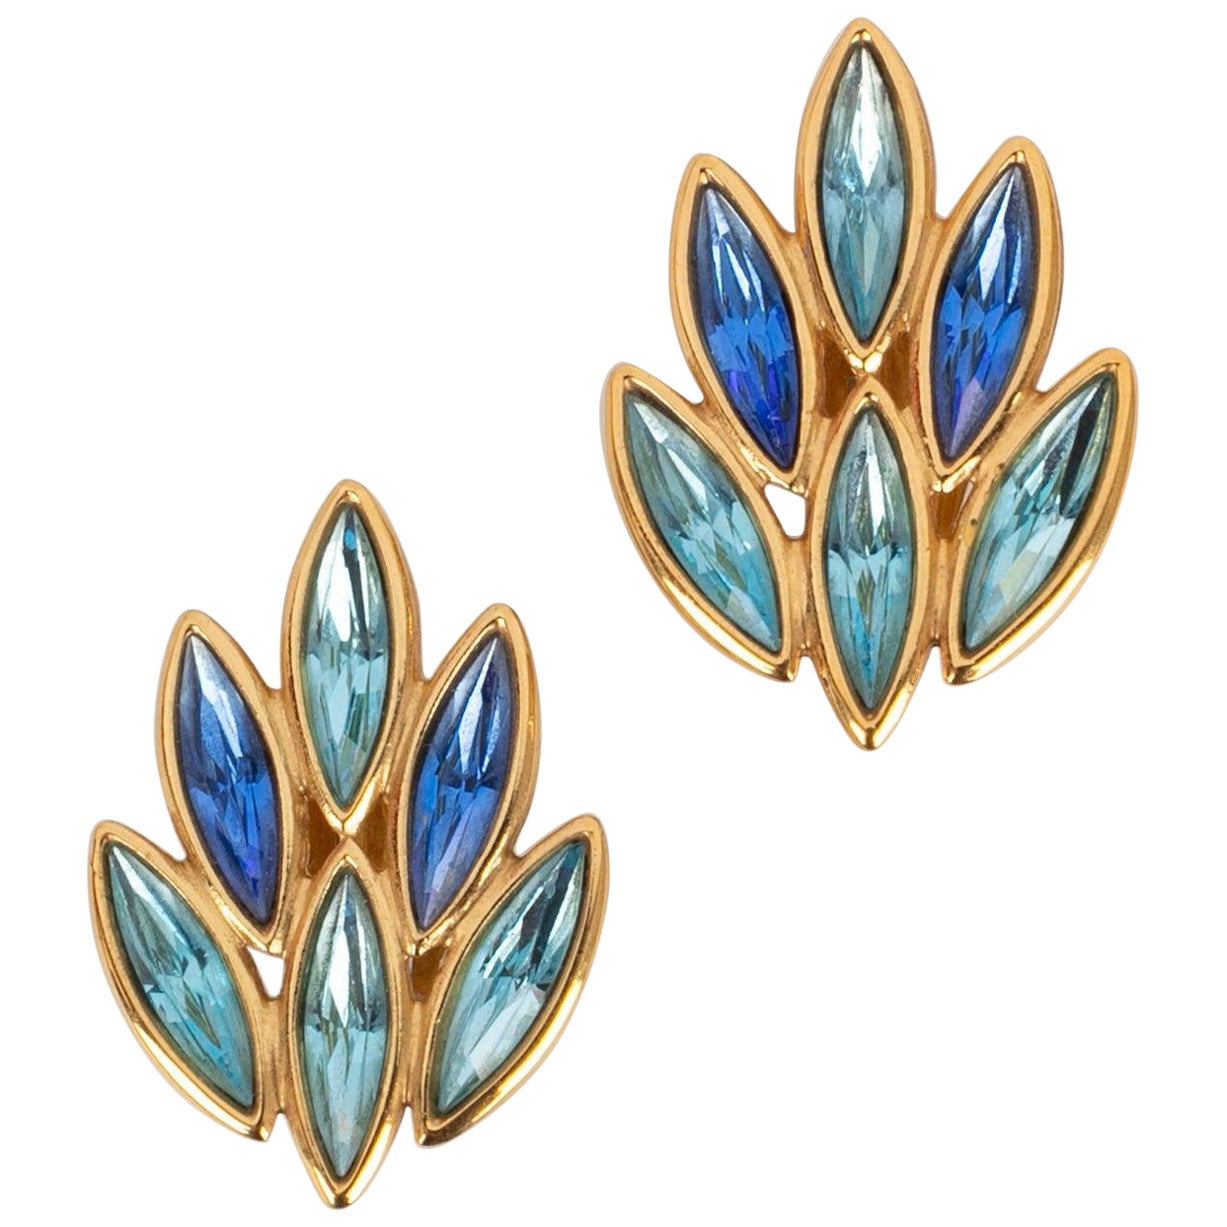 Yves Saint Laurent Golden Metal Clip-On Earrings with Blue Rhinestones For Sale